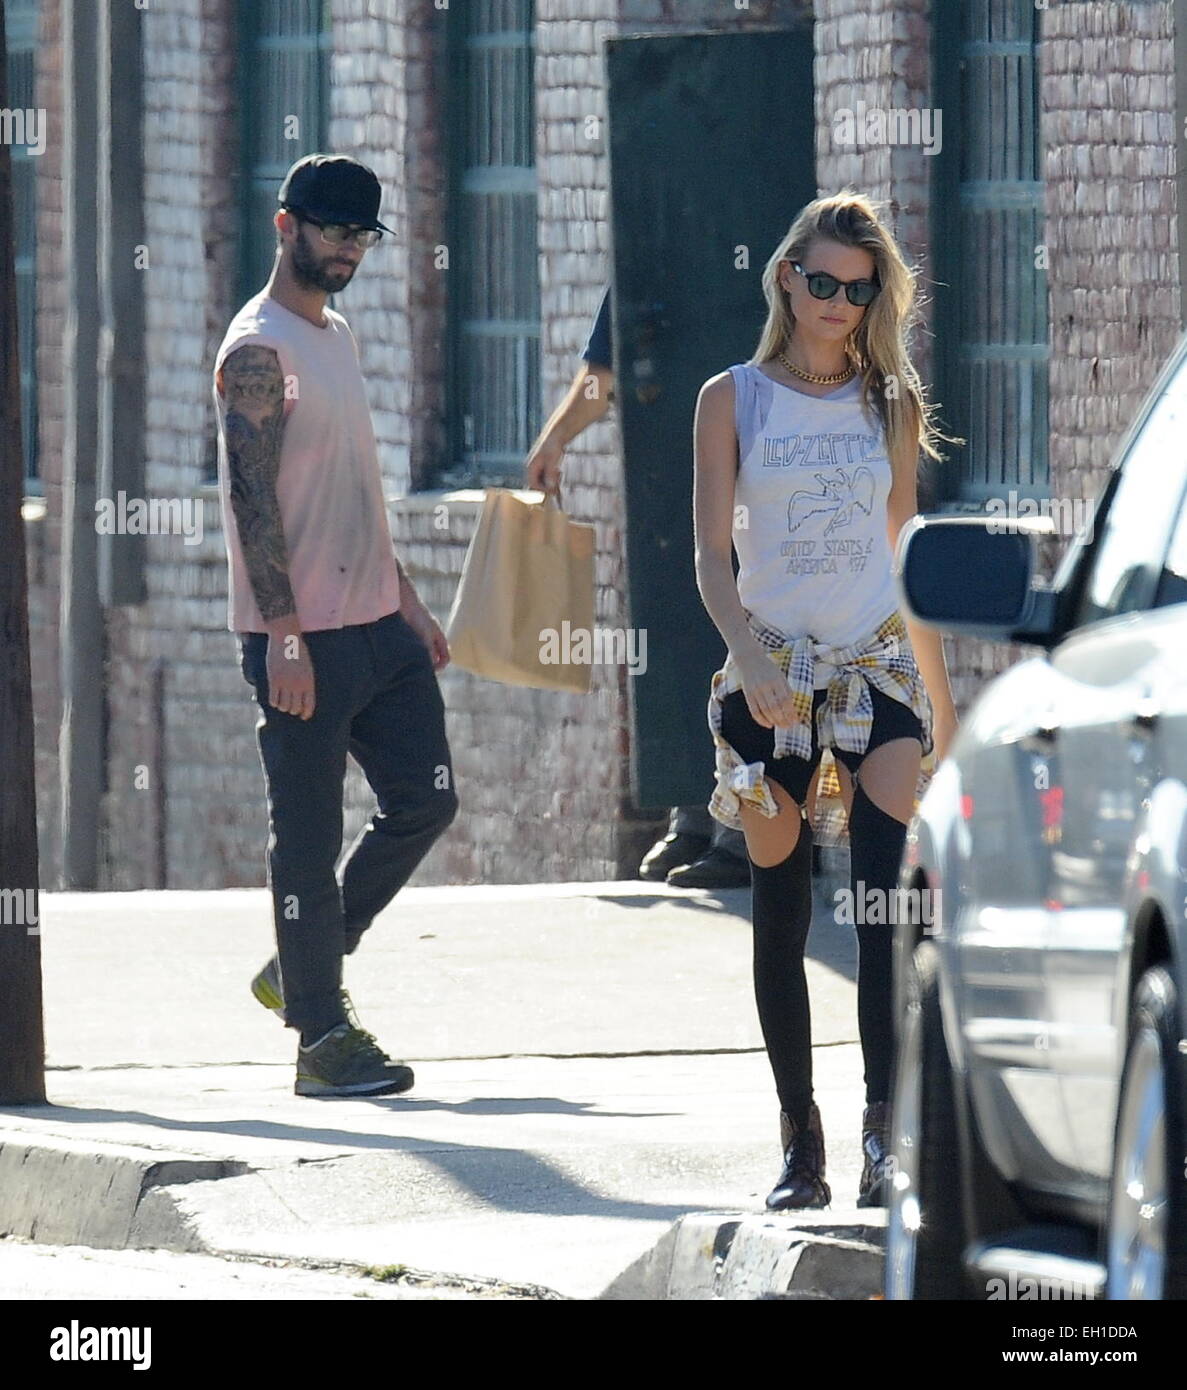 Adam Levine and wife Behati Prinsloo on the set of Maroon 5's music video  for their next single 'Animals' Featuring: Adam Levine,Behati Prinsloo  Where: Los Angeles, California, United States When: 30 Aug